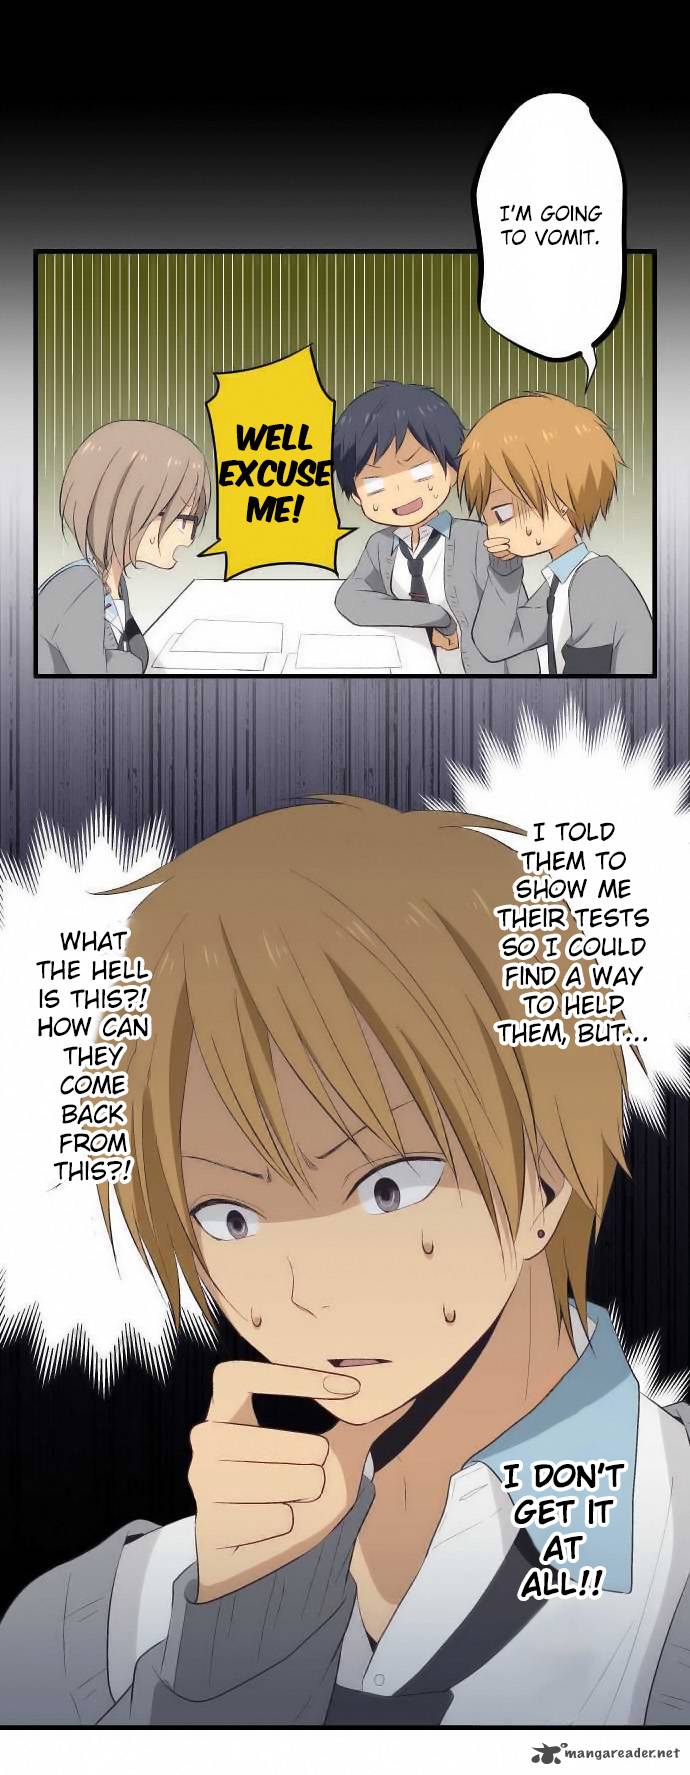 Relife 22 12